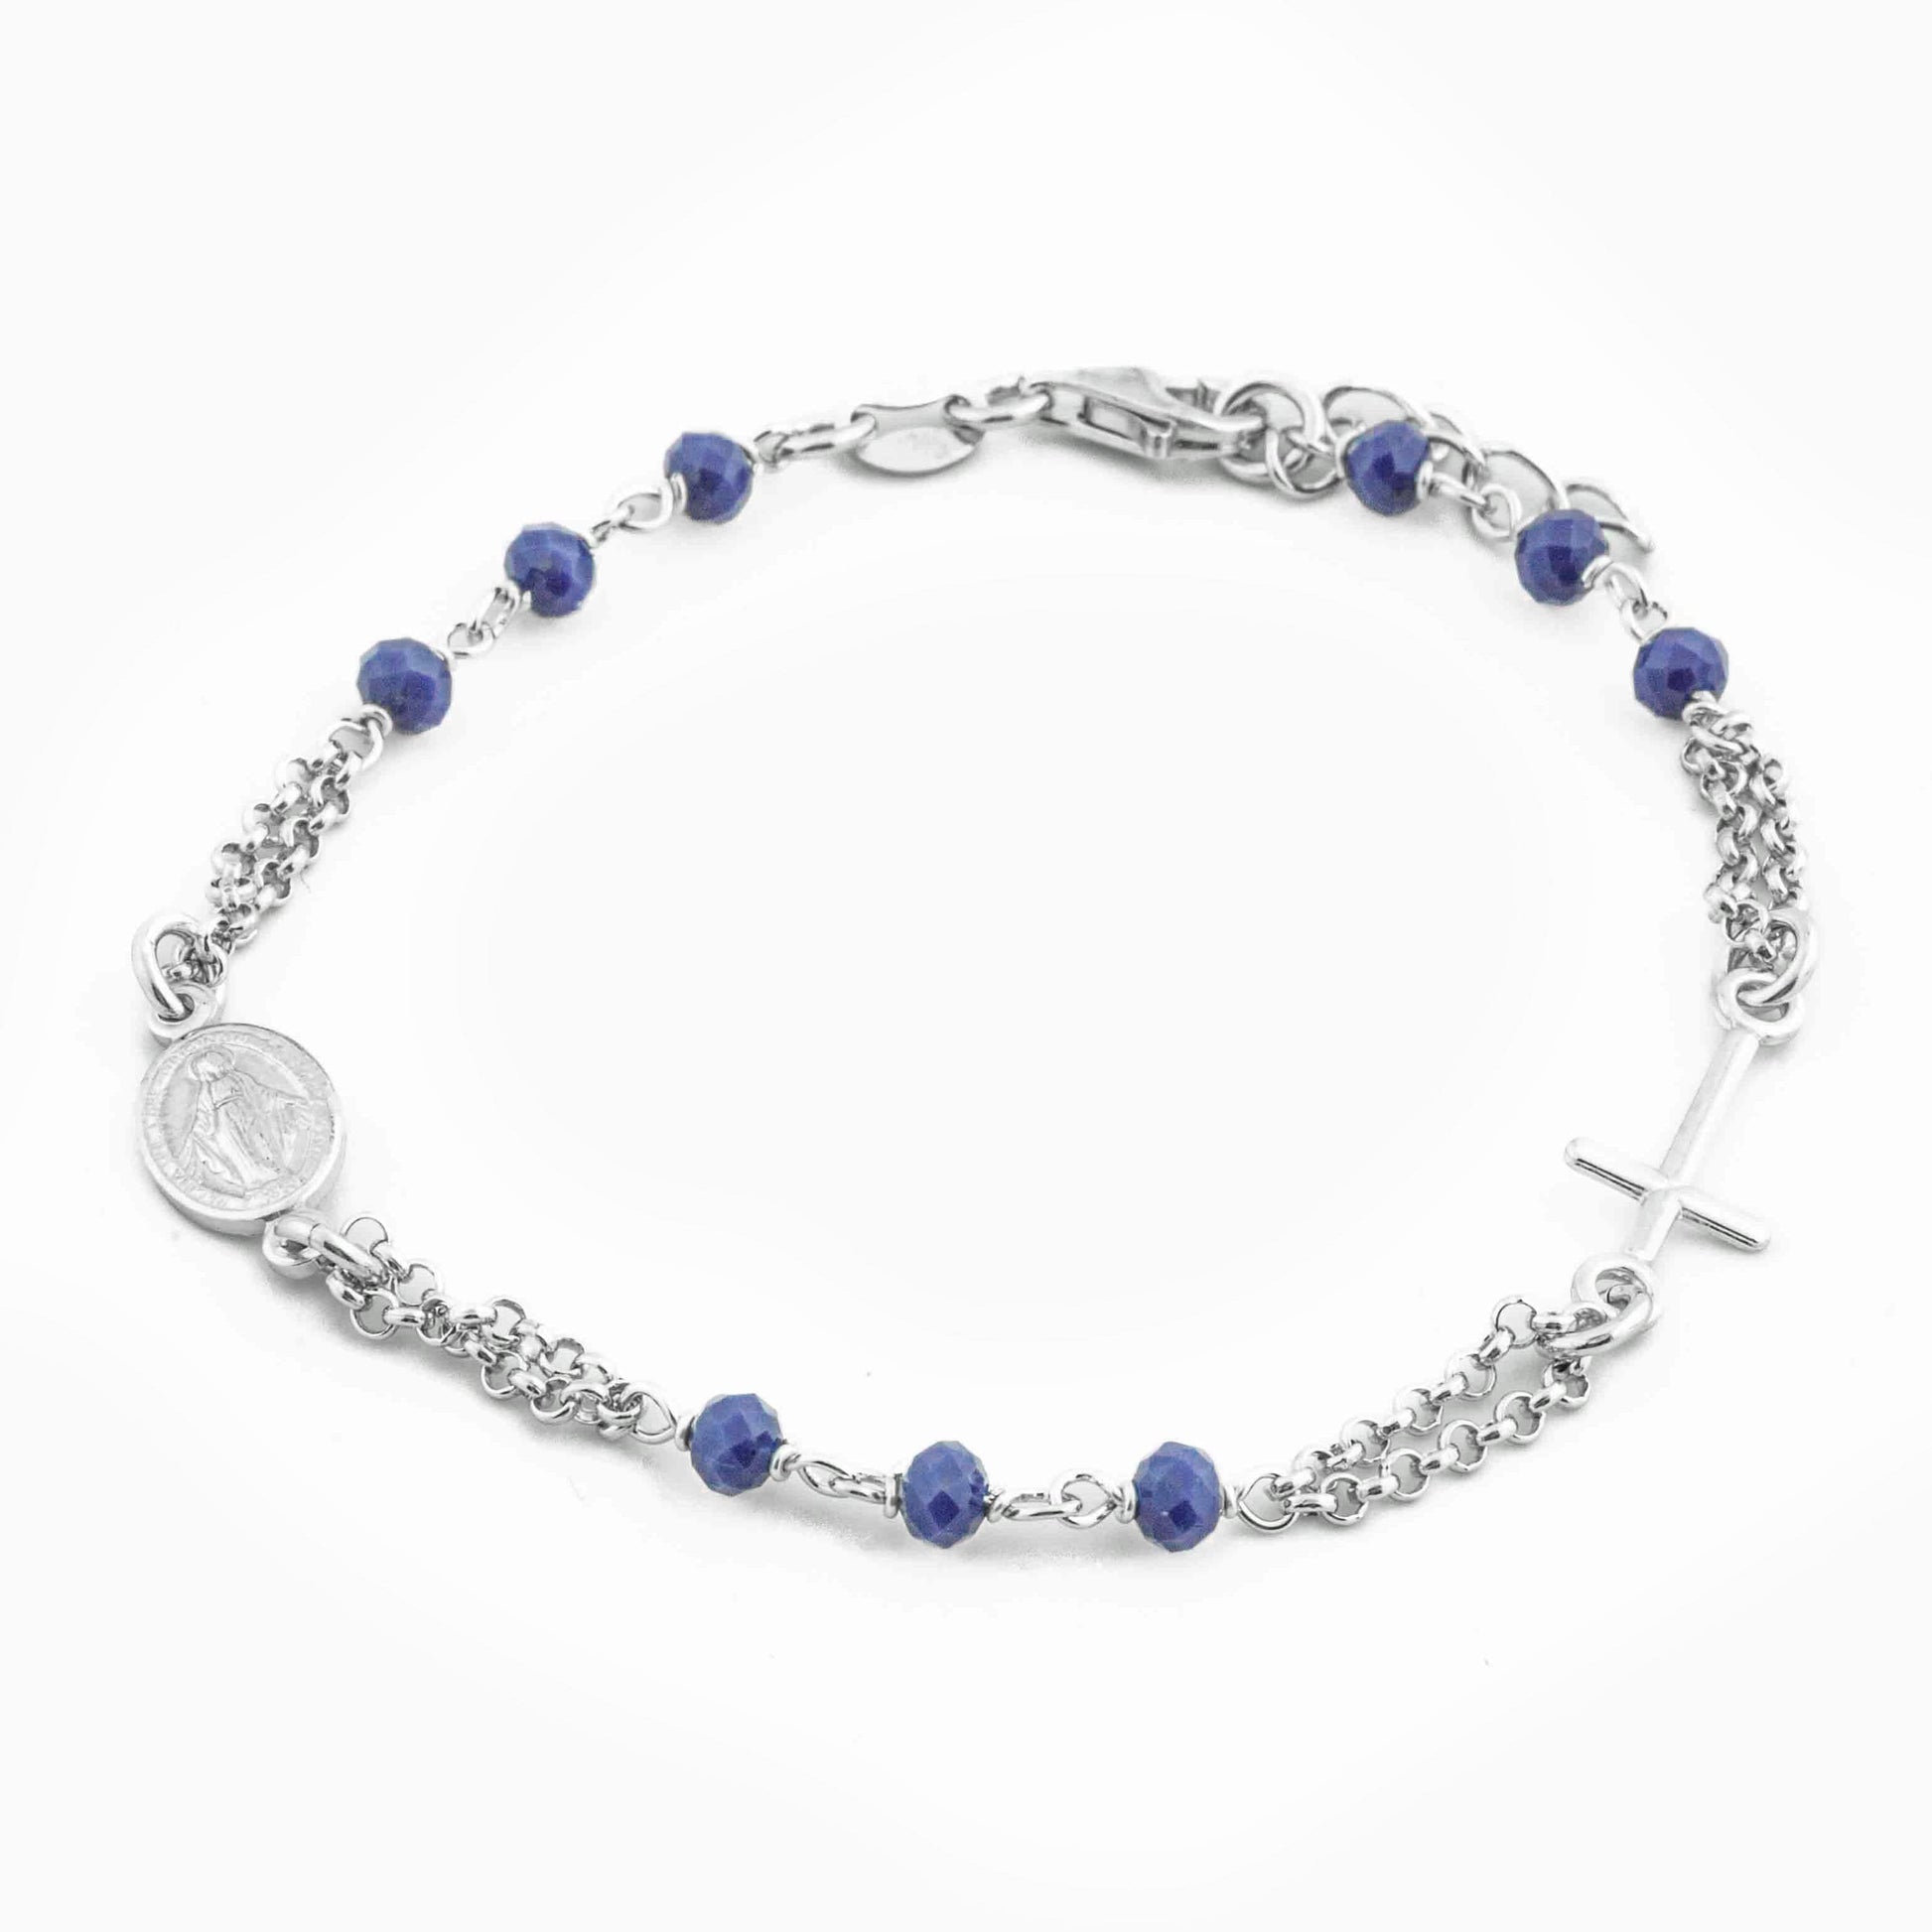 MONDO CATTOLICO Prayer Beads Rhodium and Blue / Cm 17.5 (6.9 in) STERLING SILVER ROSARY BRACELET SYNTHETIC PEARL FACETED BEADS